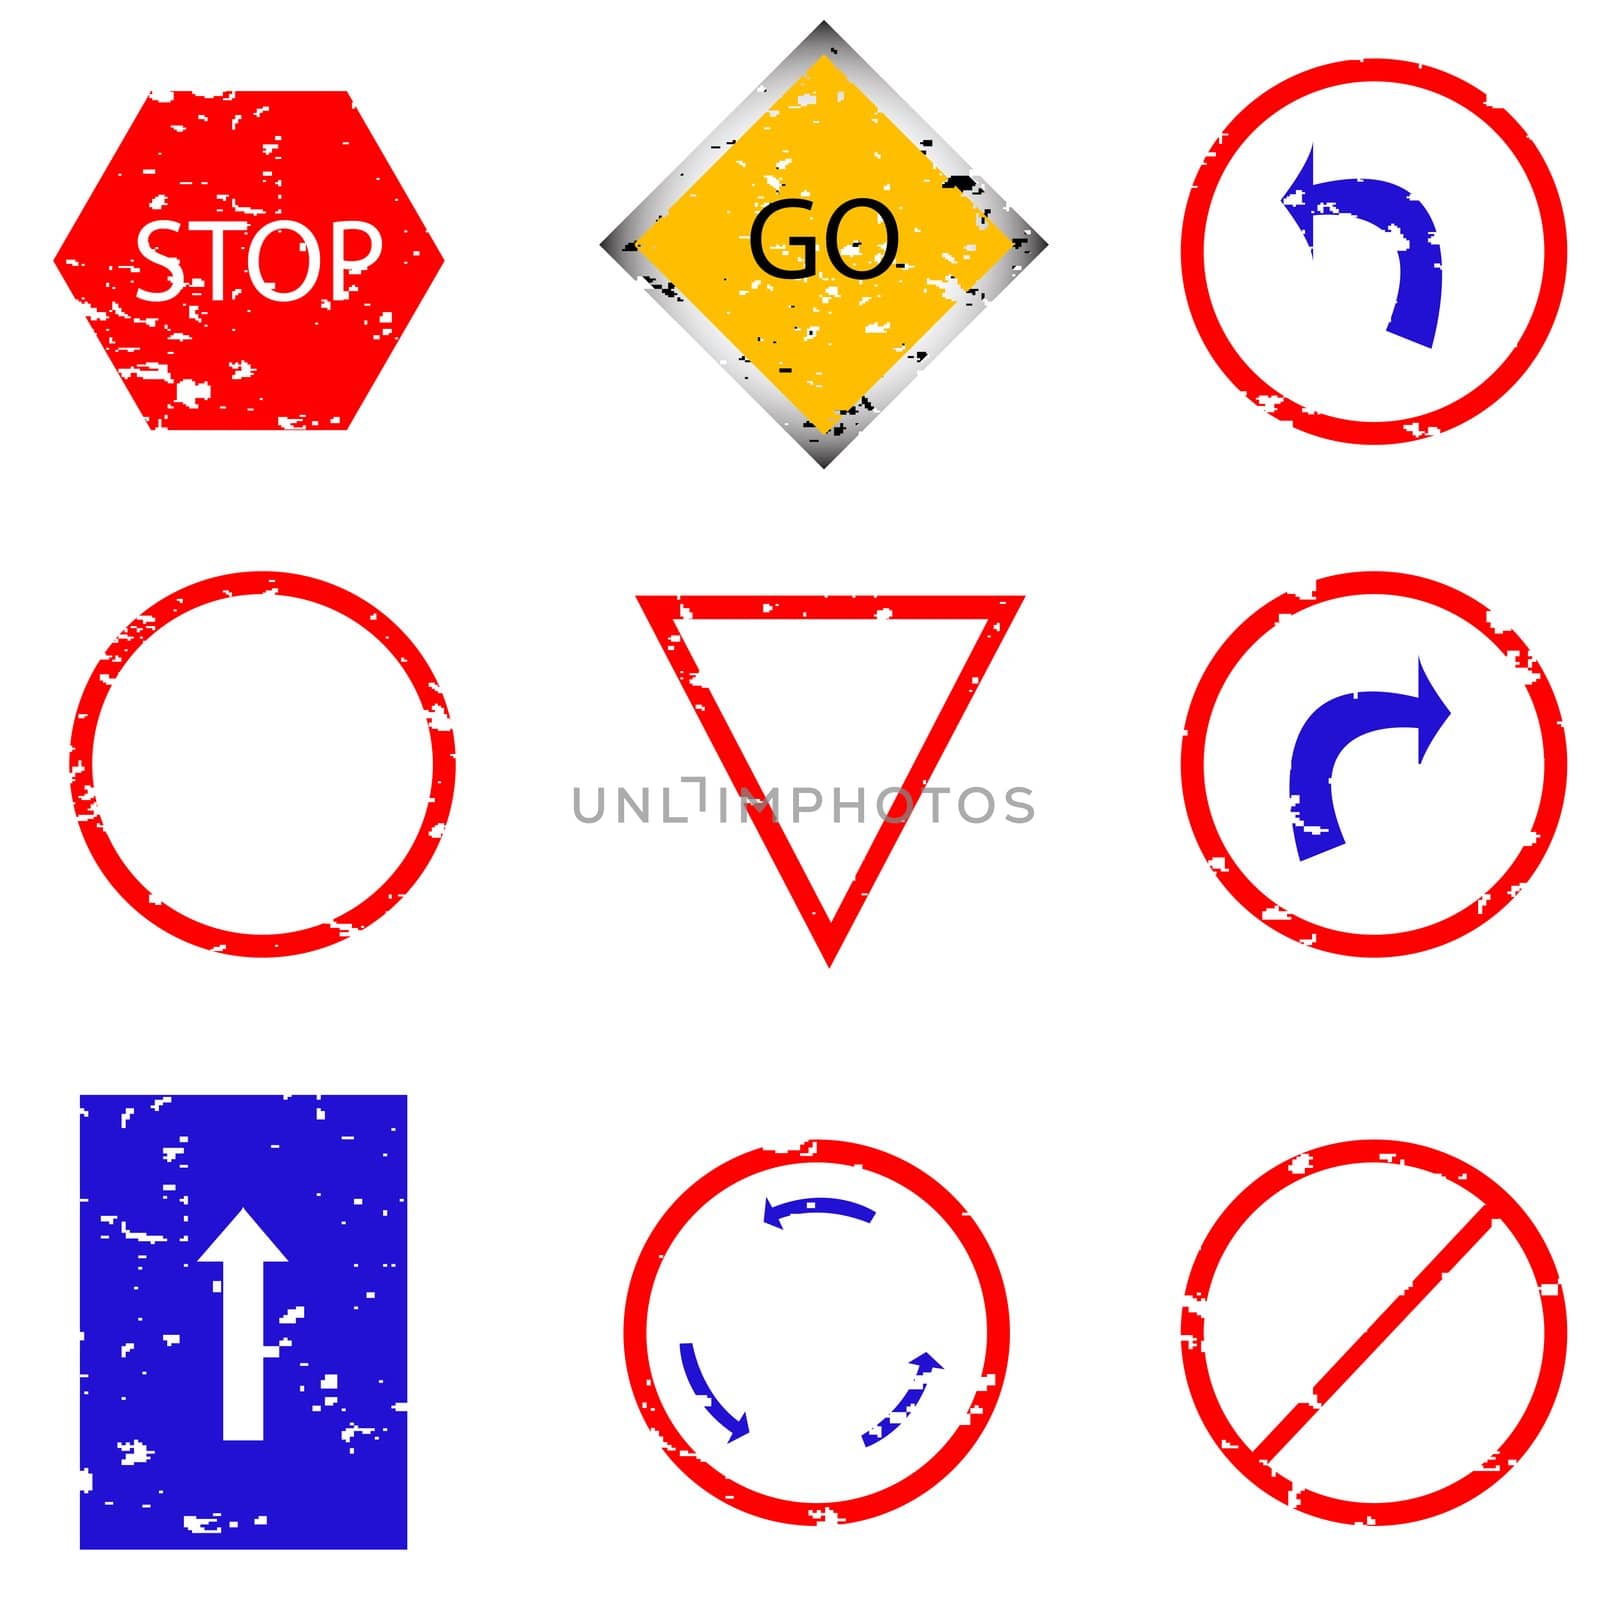 stamp with traffic sign, vector art illustration